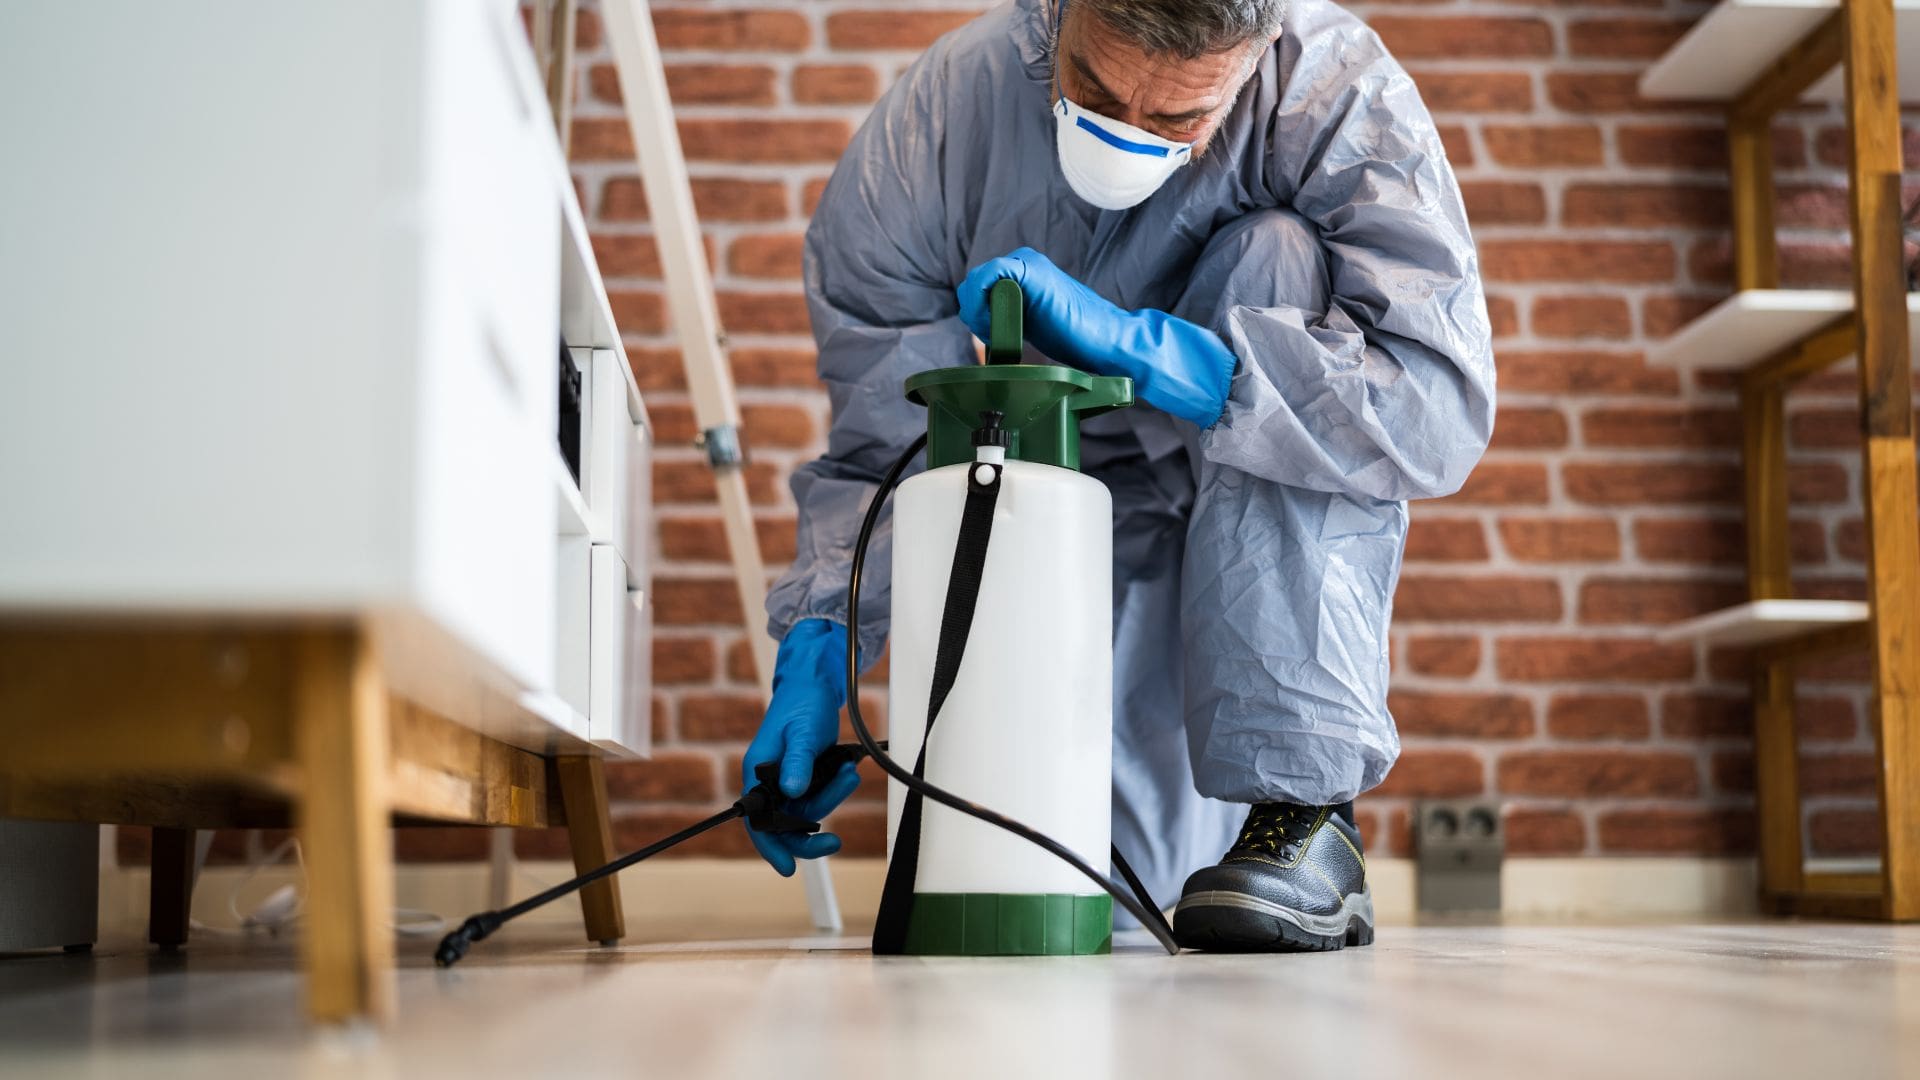 Who Pays for Pest Control in a Rental? - Pete's Pest Control